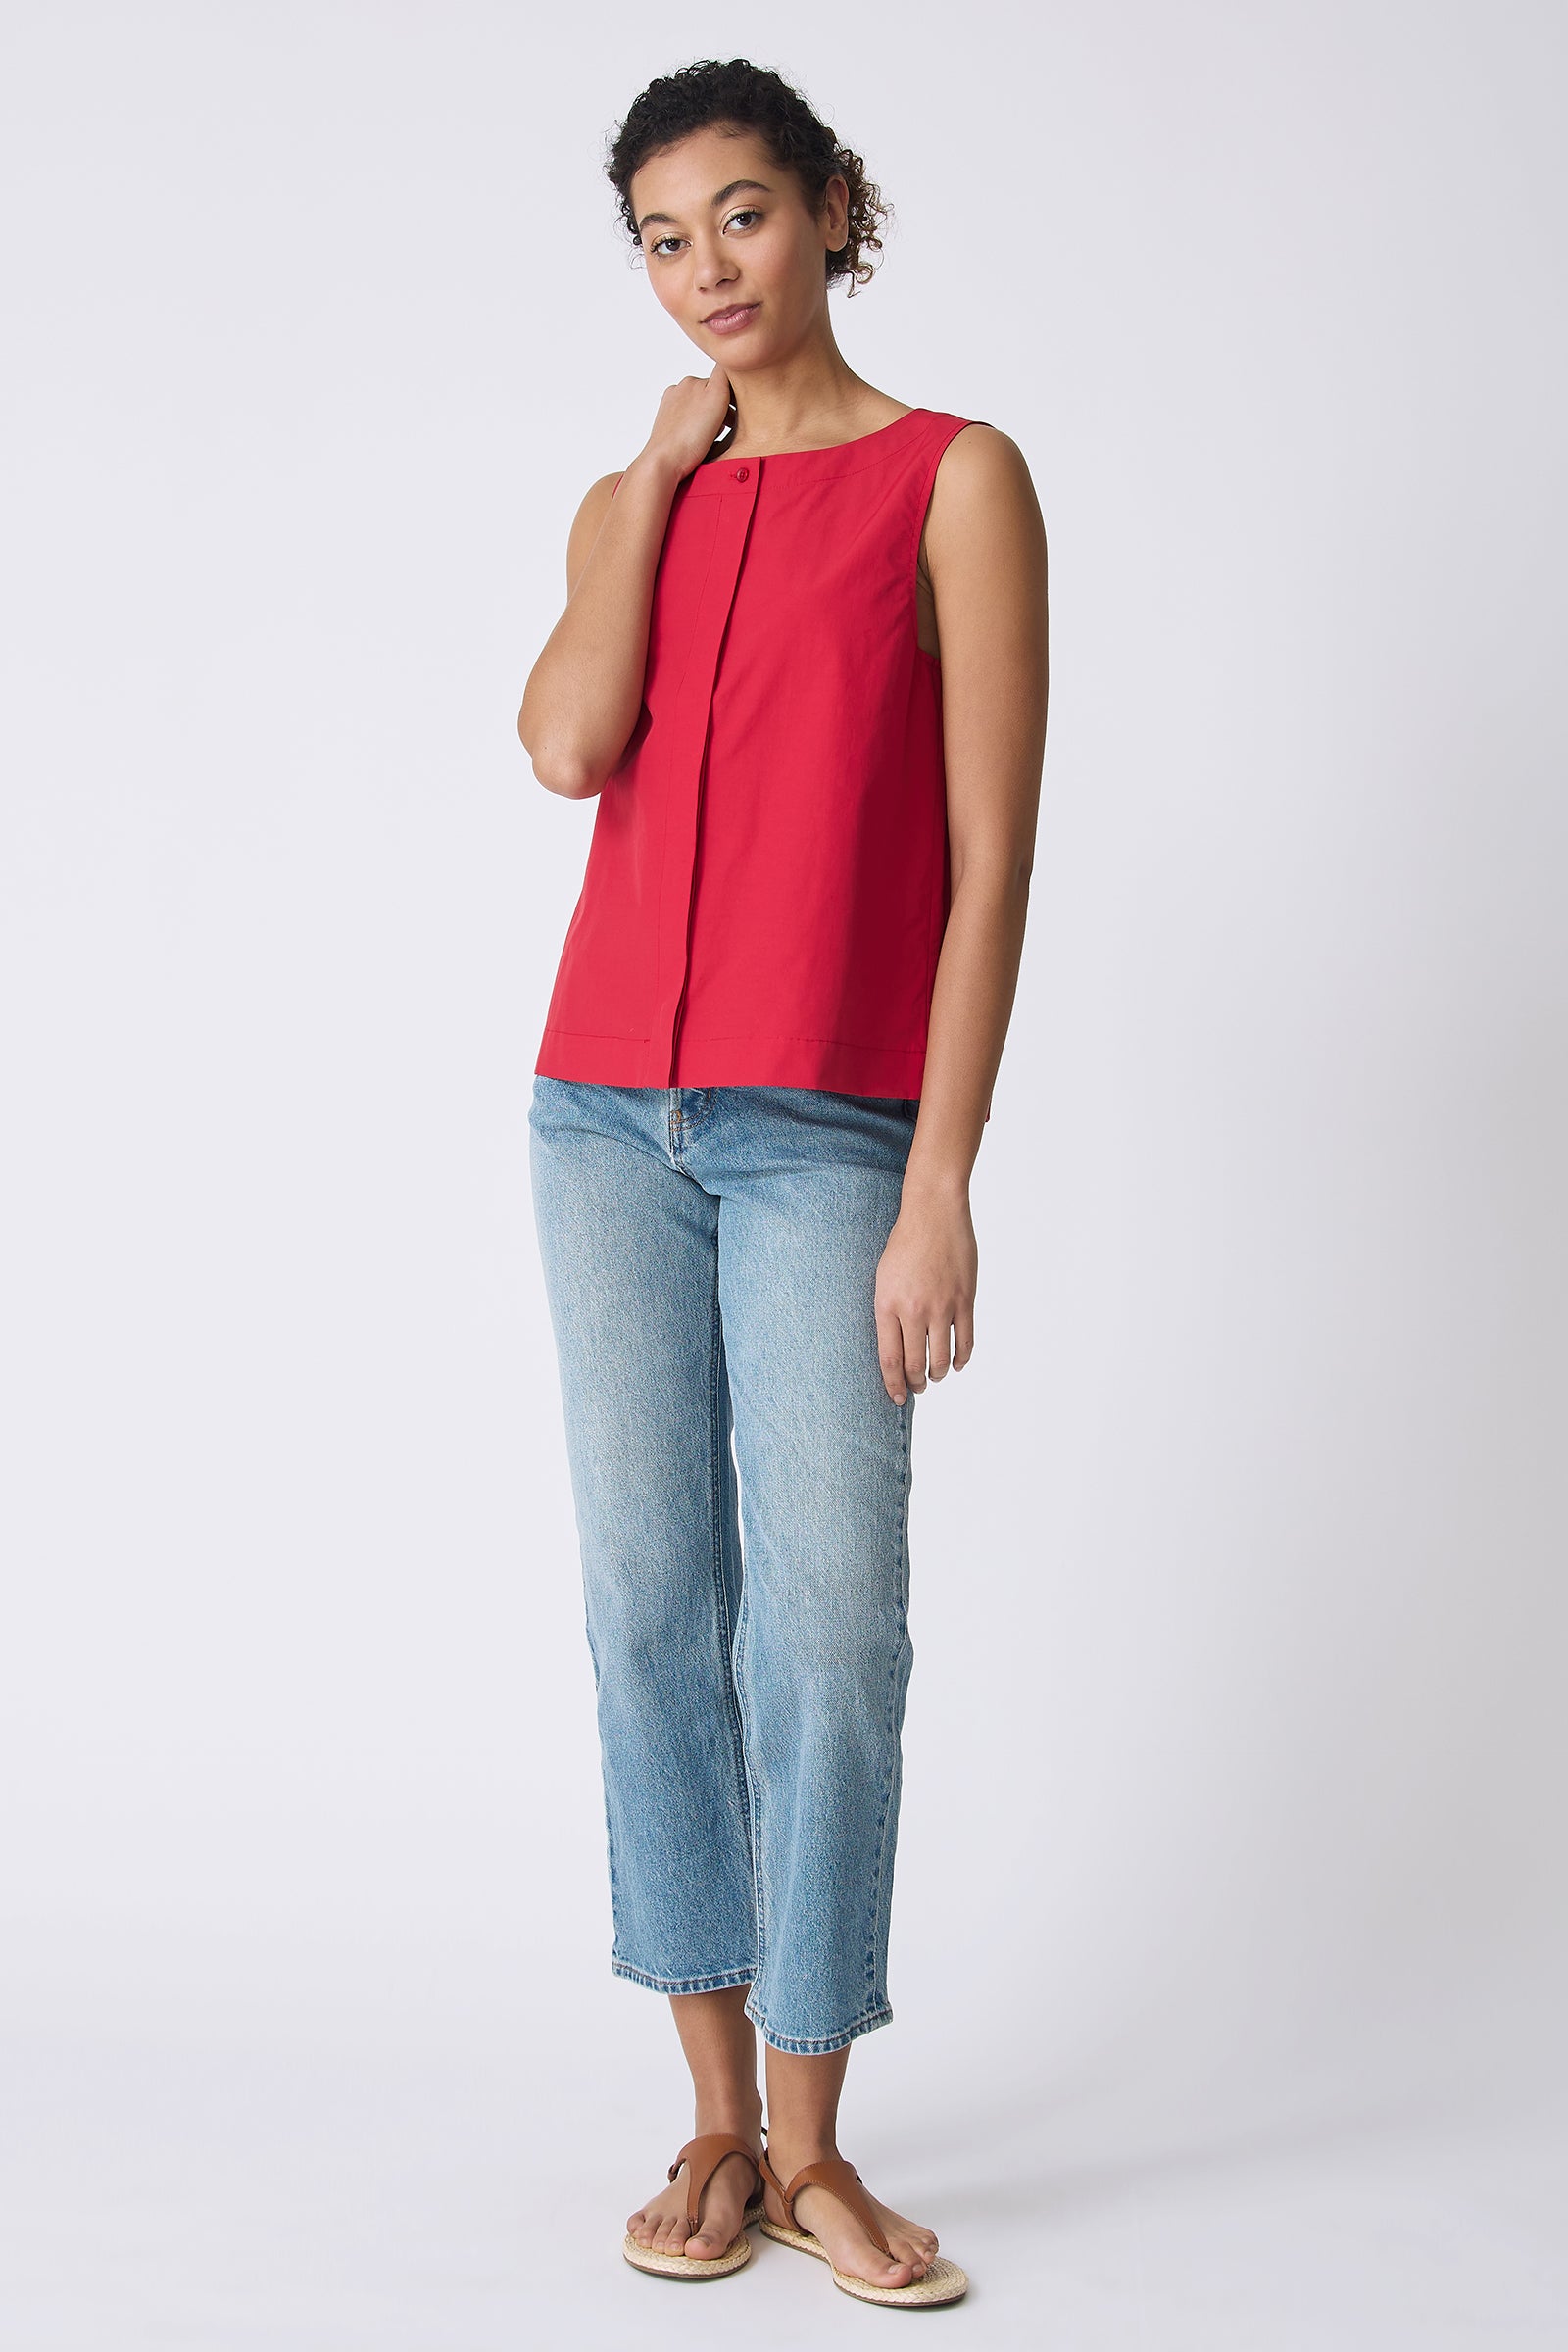 Kal Rieman Colette Shell Top in Red on model full front view